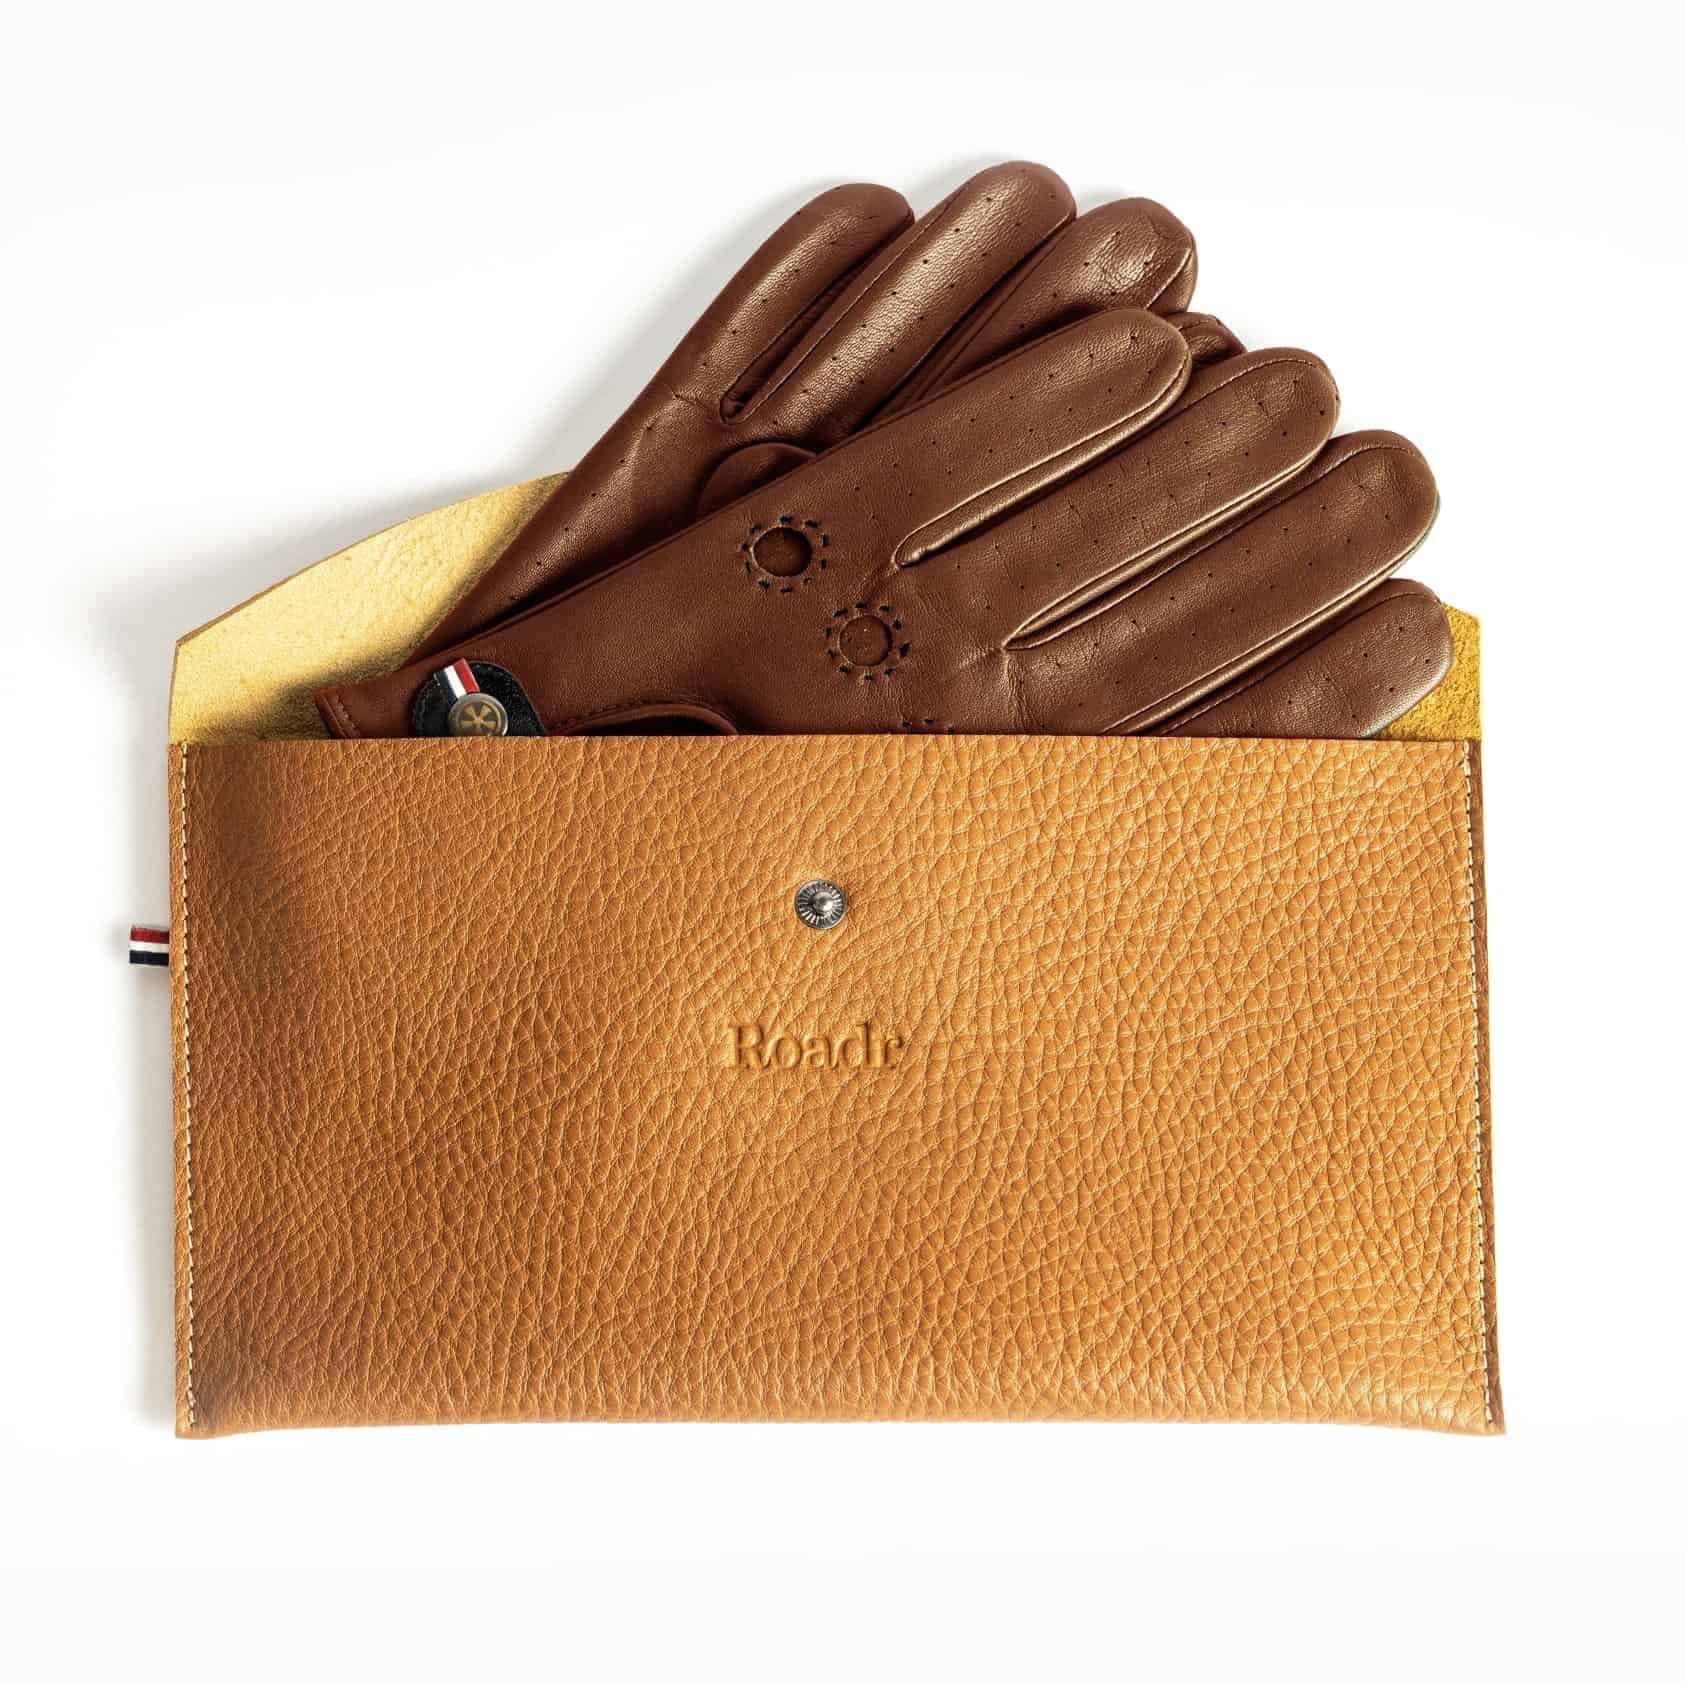 Classic brown leather driving racing gloves sleeve